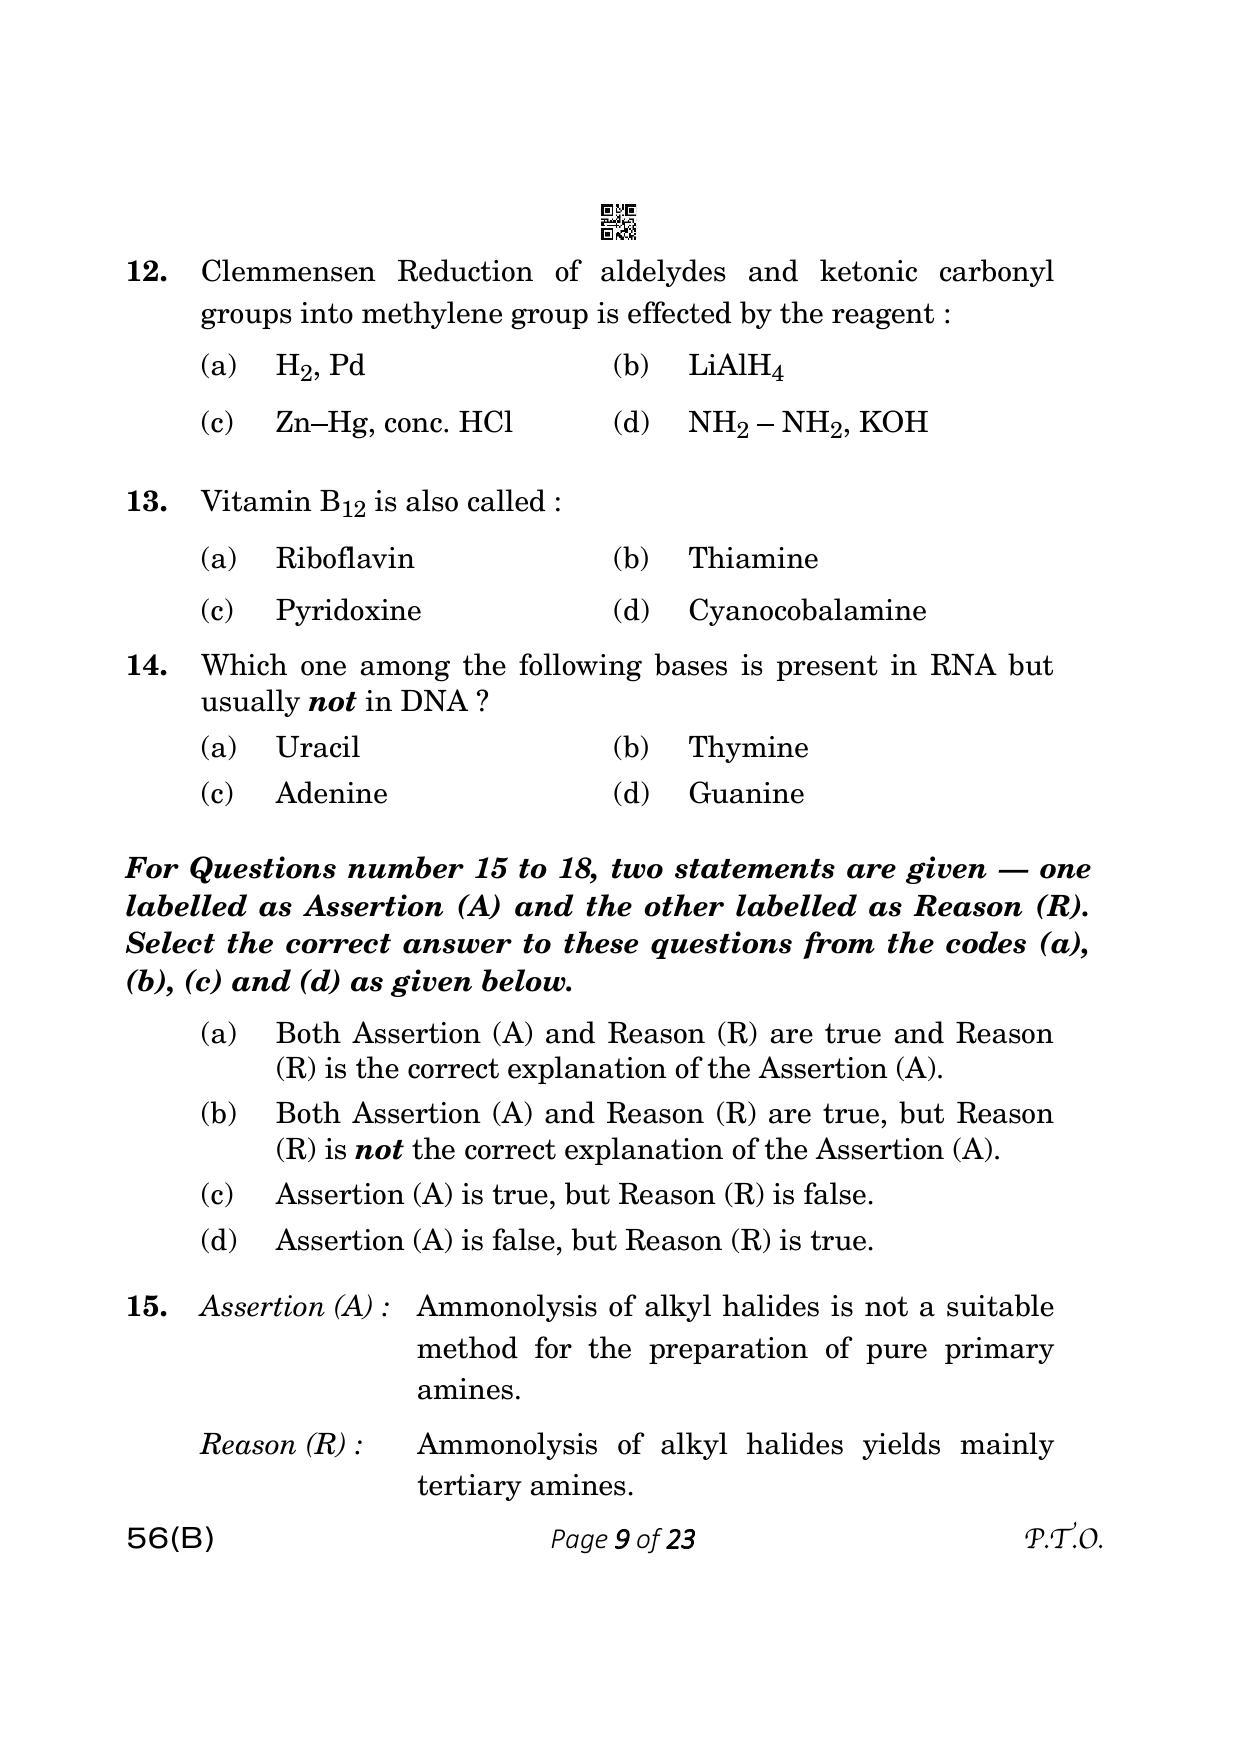 CBSE Class 12 56-B Chemistry 2023 (Compartment) Question Paper - Page 9